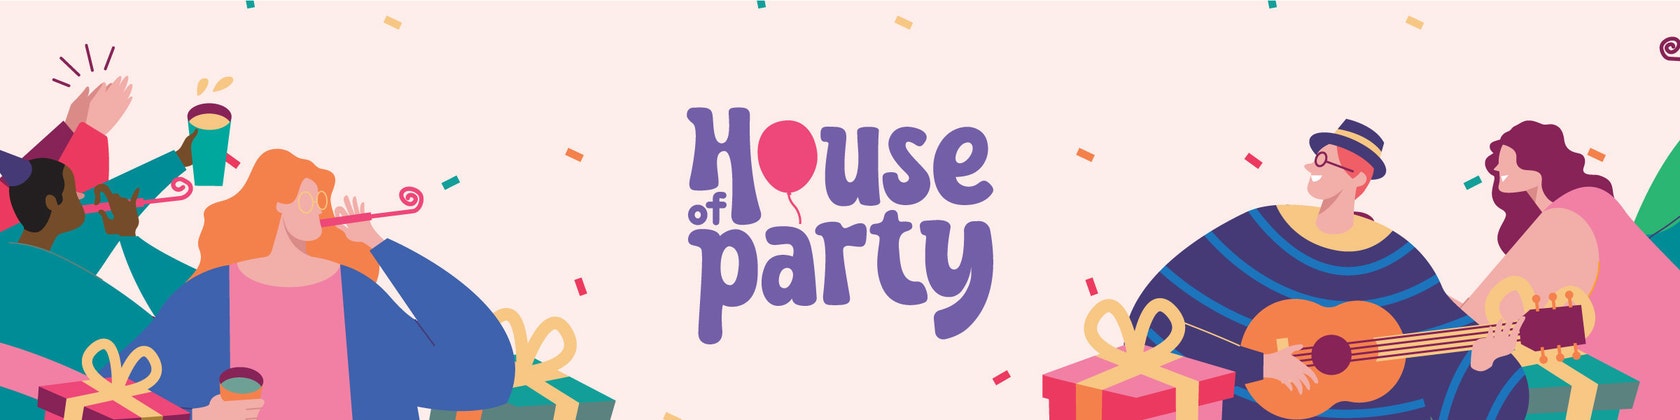 Pin on Buy Now  House Of Party